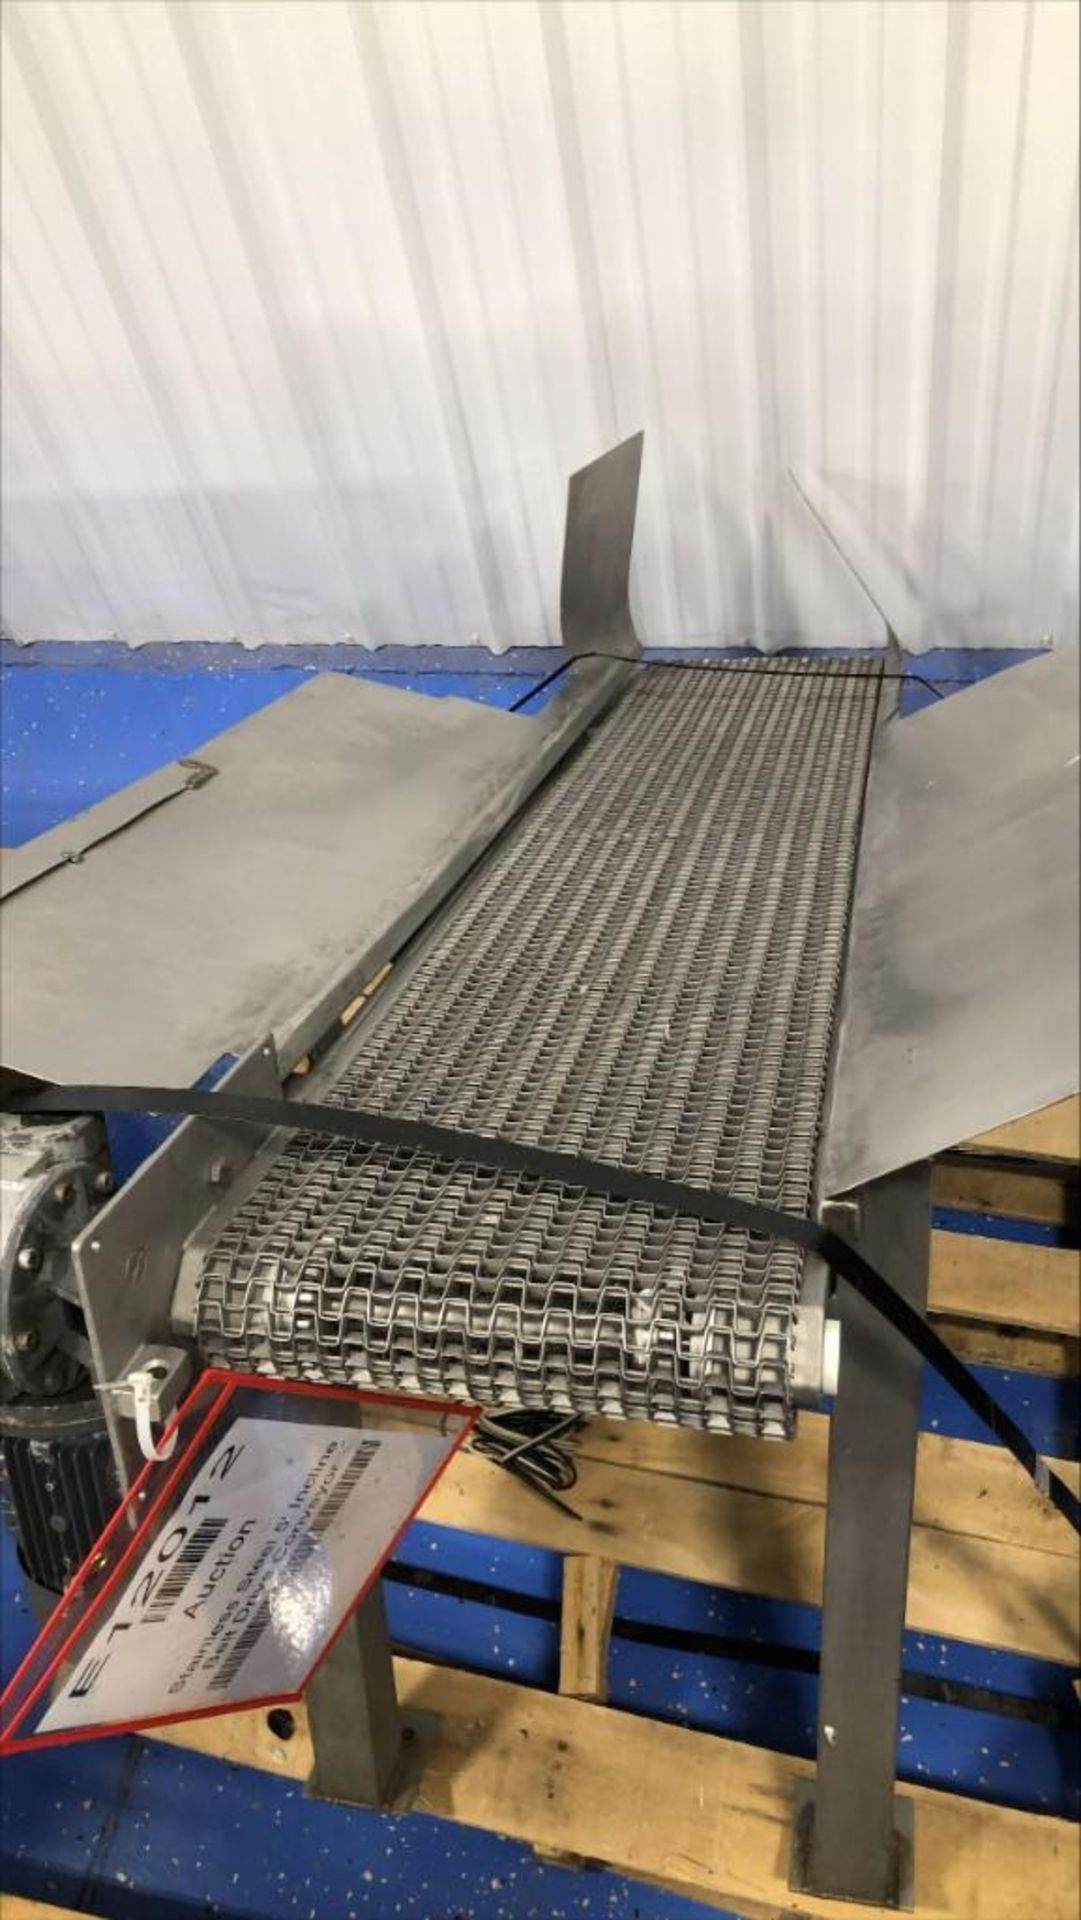 Stainless Steel 5' Incline Belt Drive Conveyor - Image 5 of 5